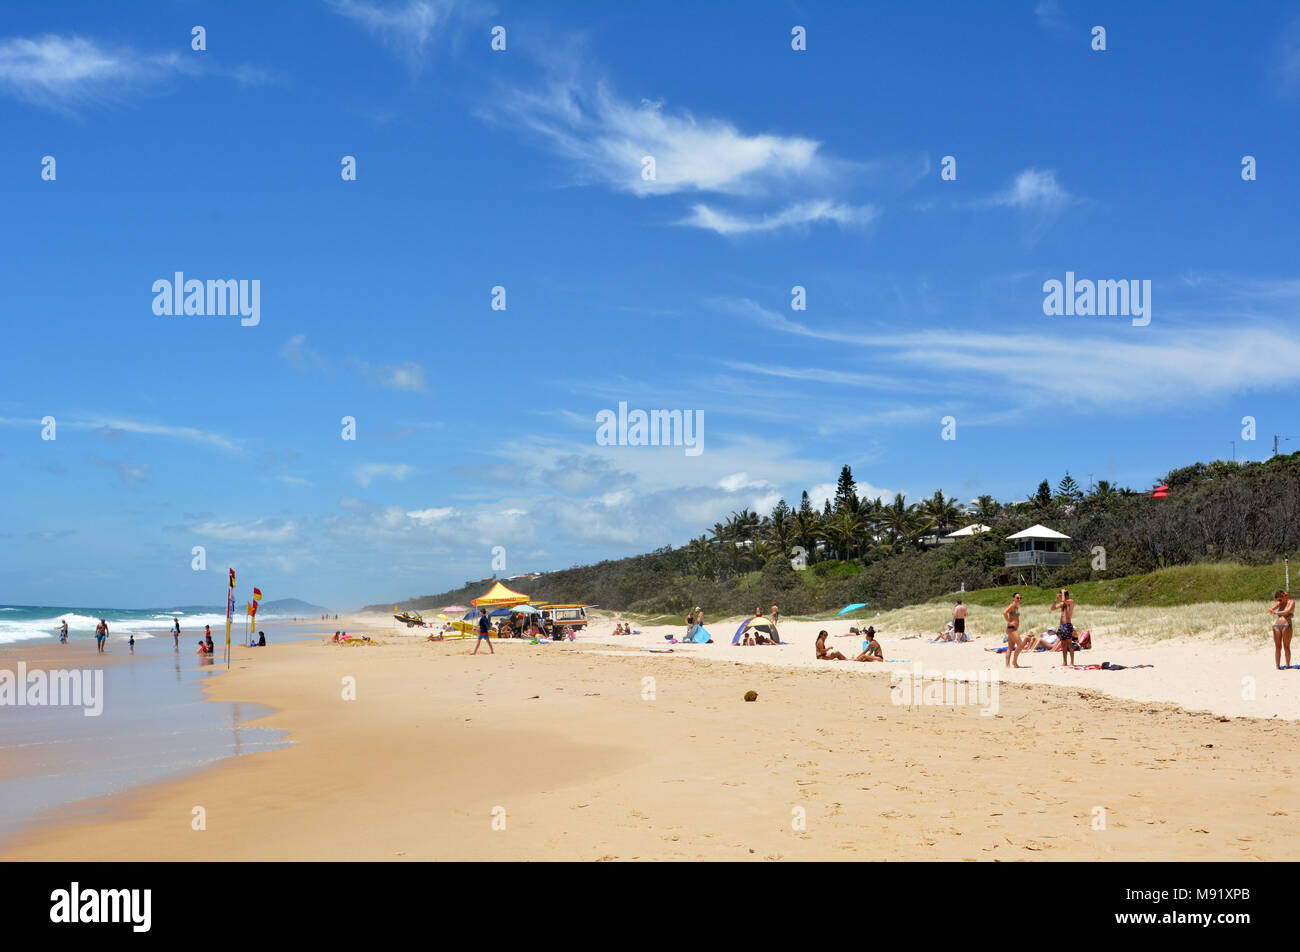 Noosa, Queensland, Australia - December 20, 2017. Sunshine Beach south of Noosa, QLD, with people. Stock Photo